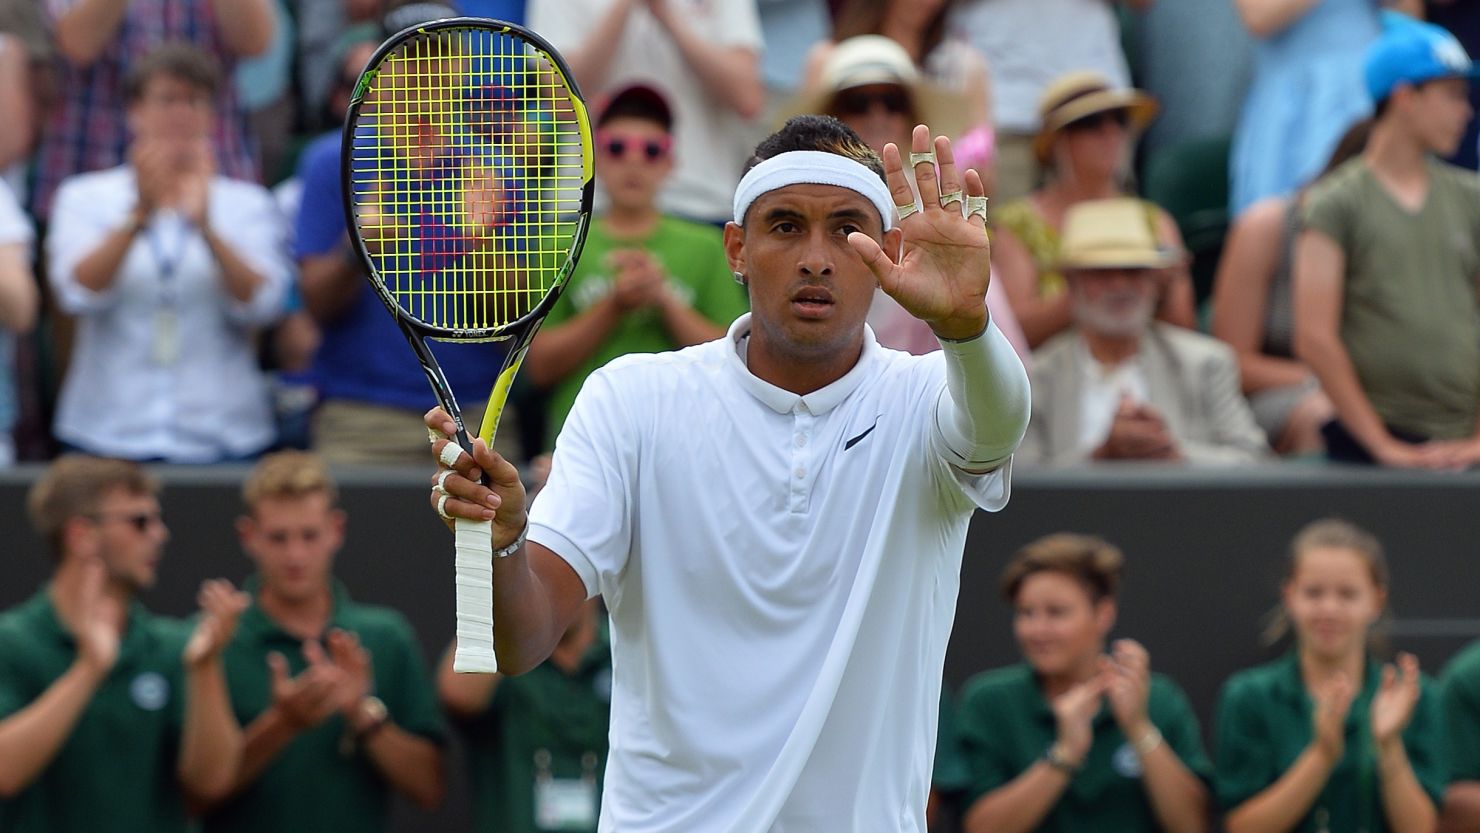 Nick Kyrgios reached the fourth round at Wimbledon after beating Canada's Milos Raonic. 